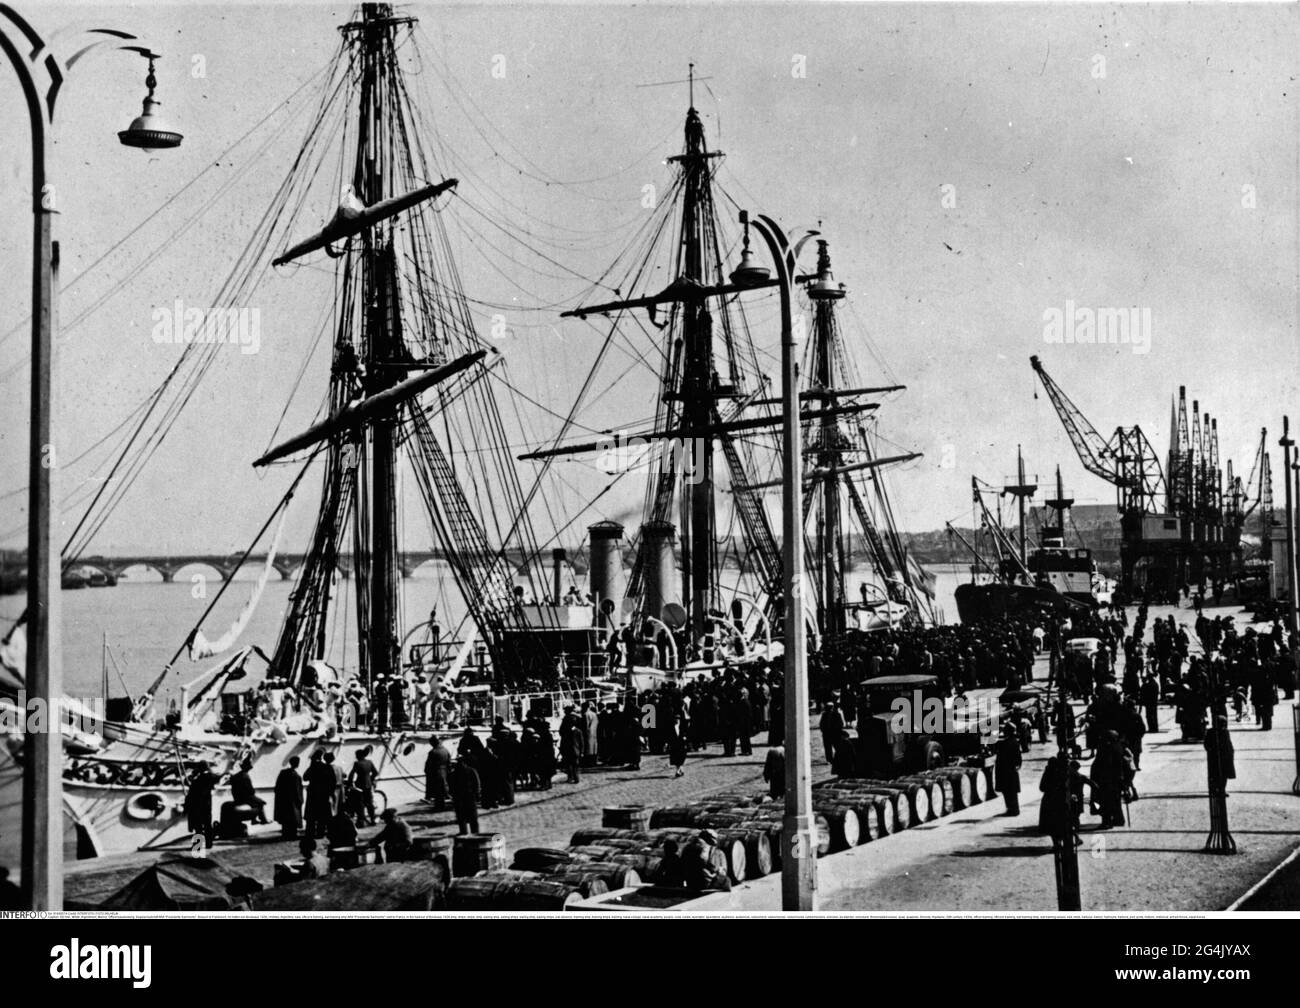 military, Argentina, navy, officer's training, sail training ship ARA 'Presidente Sarmiento', ADDITIONAL-RIGHTS-CLEARANCE-INFO-NOT-AVAILABLE Stock Photo